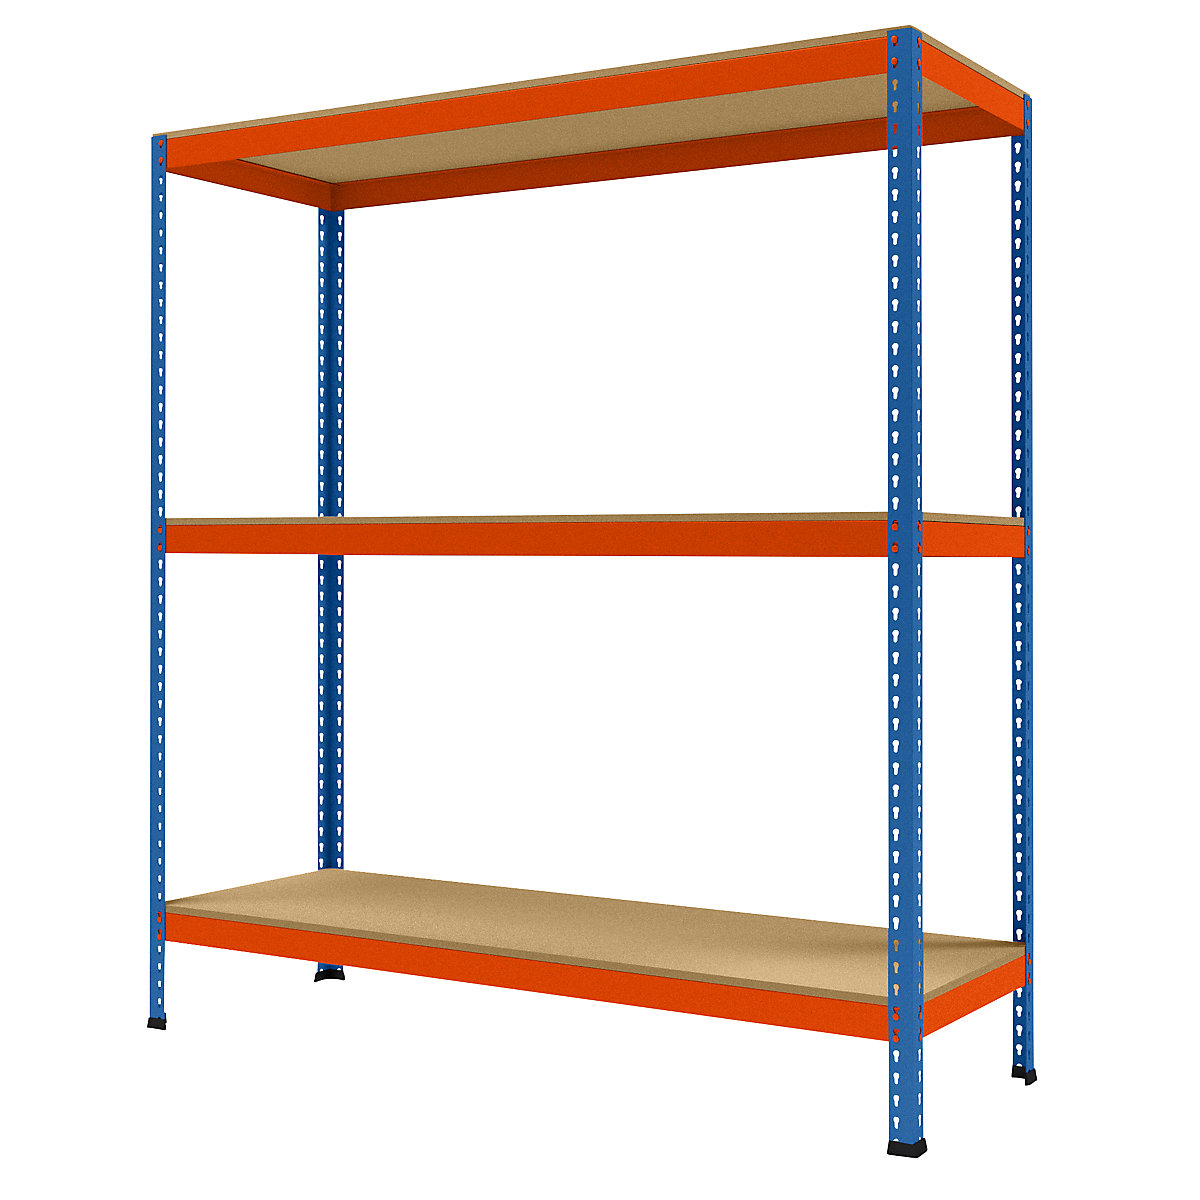 Wide span heavy duty shelving, height 1981 mm, overall depth 621 mm, width 1841 mm